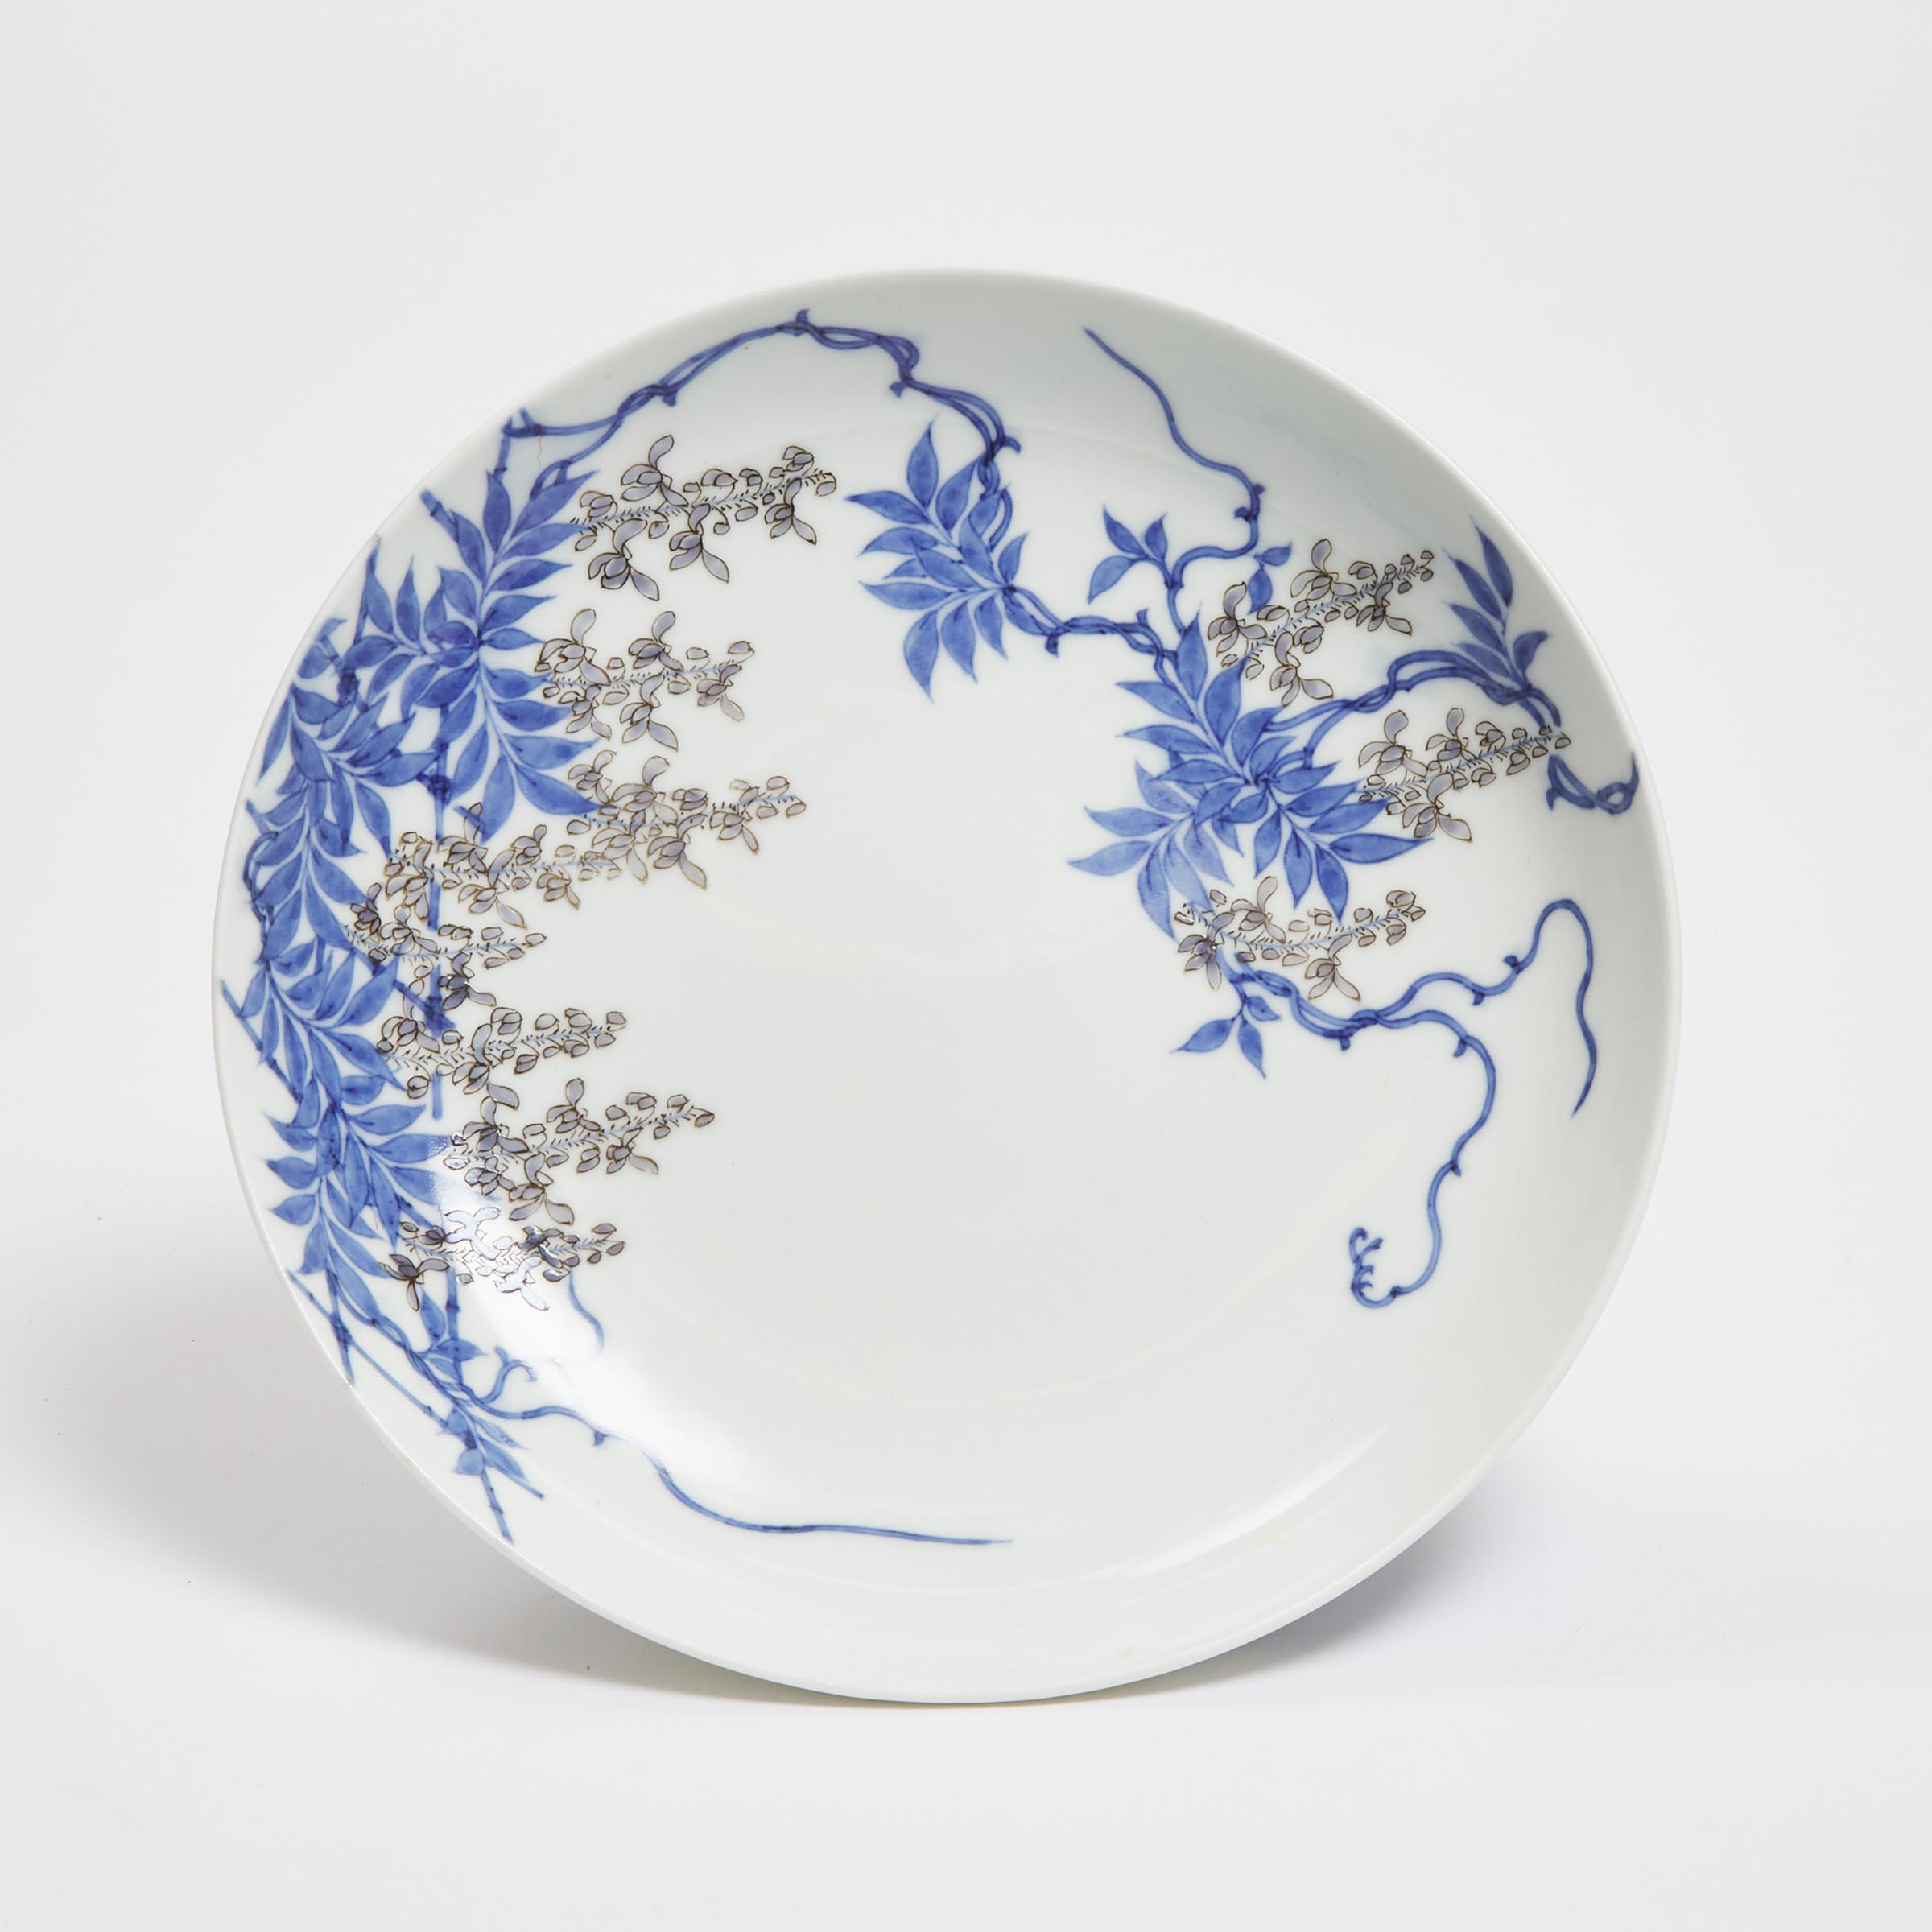 A Grisaille-Decorated Blue and White Nabeshima 'Wisteria' Footed Bowl, Edo Period, 18th Century